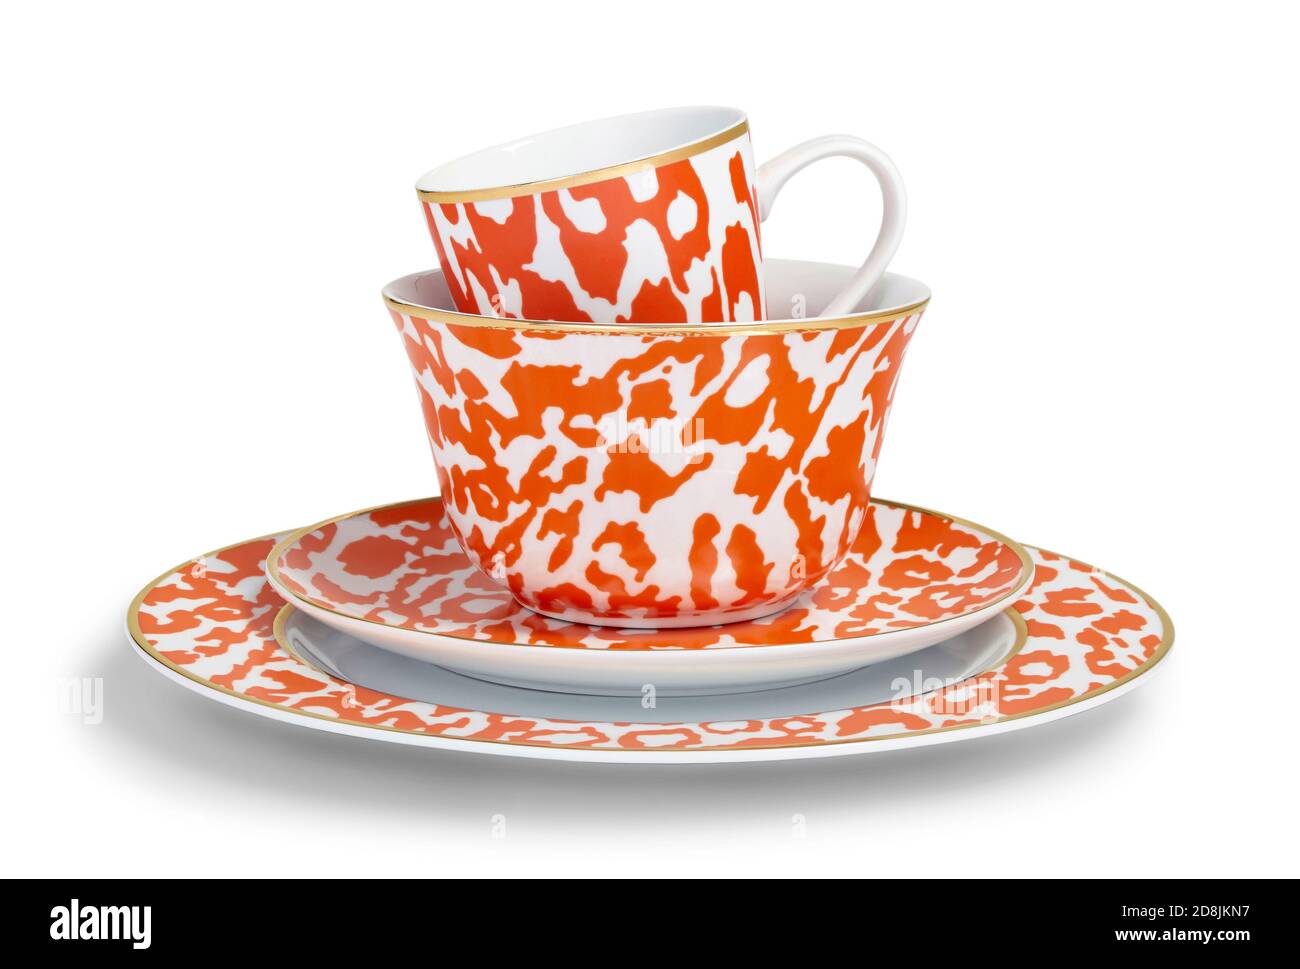 Leopard orange dinnerware set with plate, bowl, cup, and saucer from the Fall 2013 C.Wonder Look Book photographed on a white background. Stock Photo